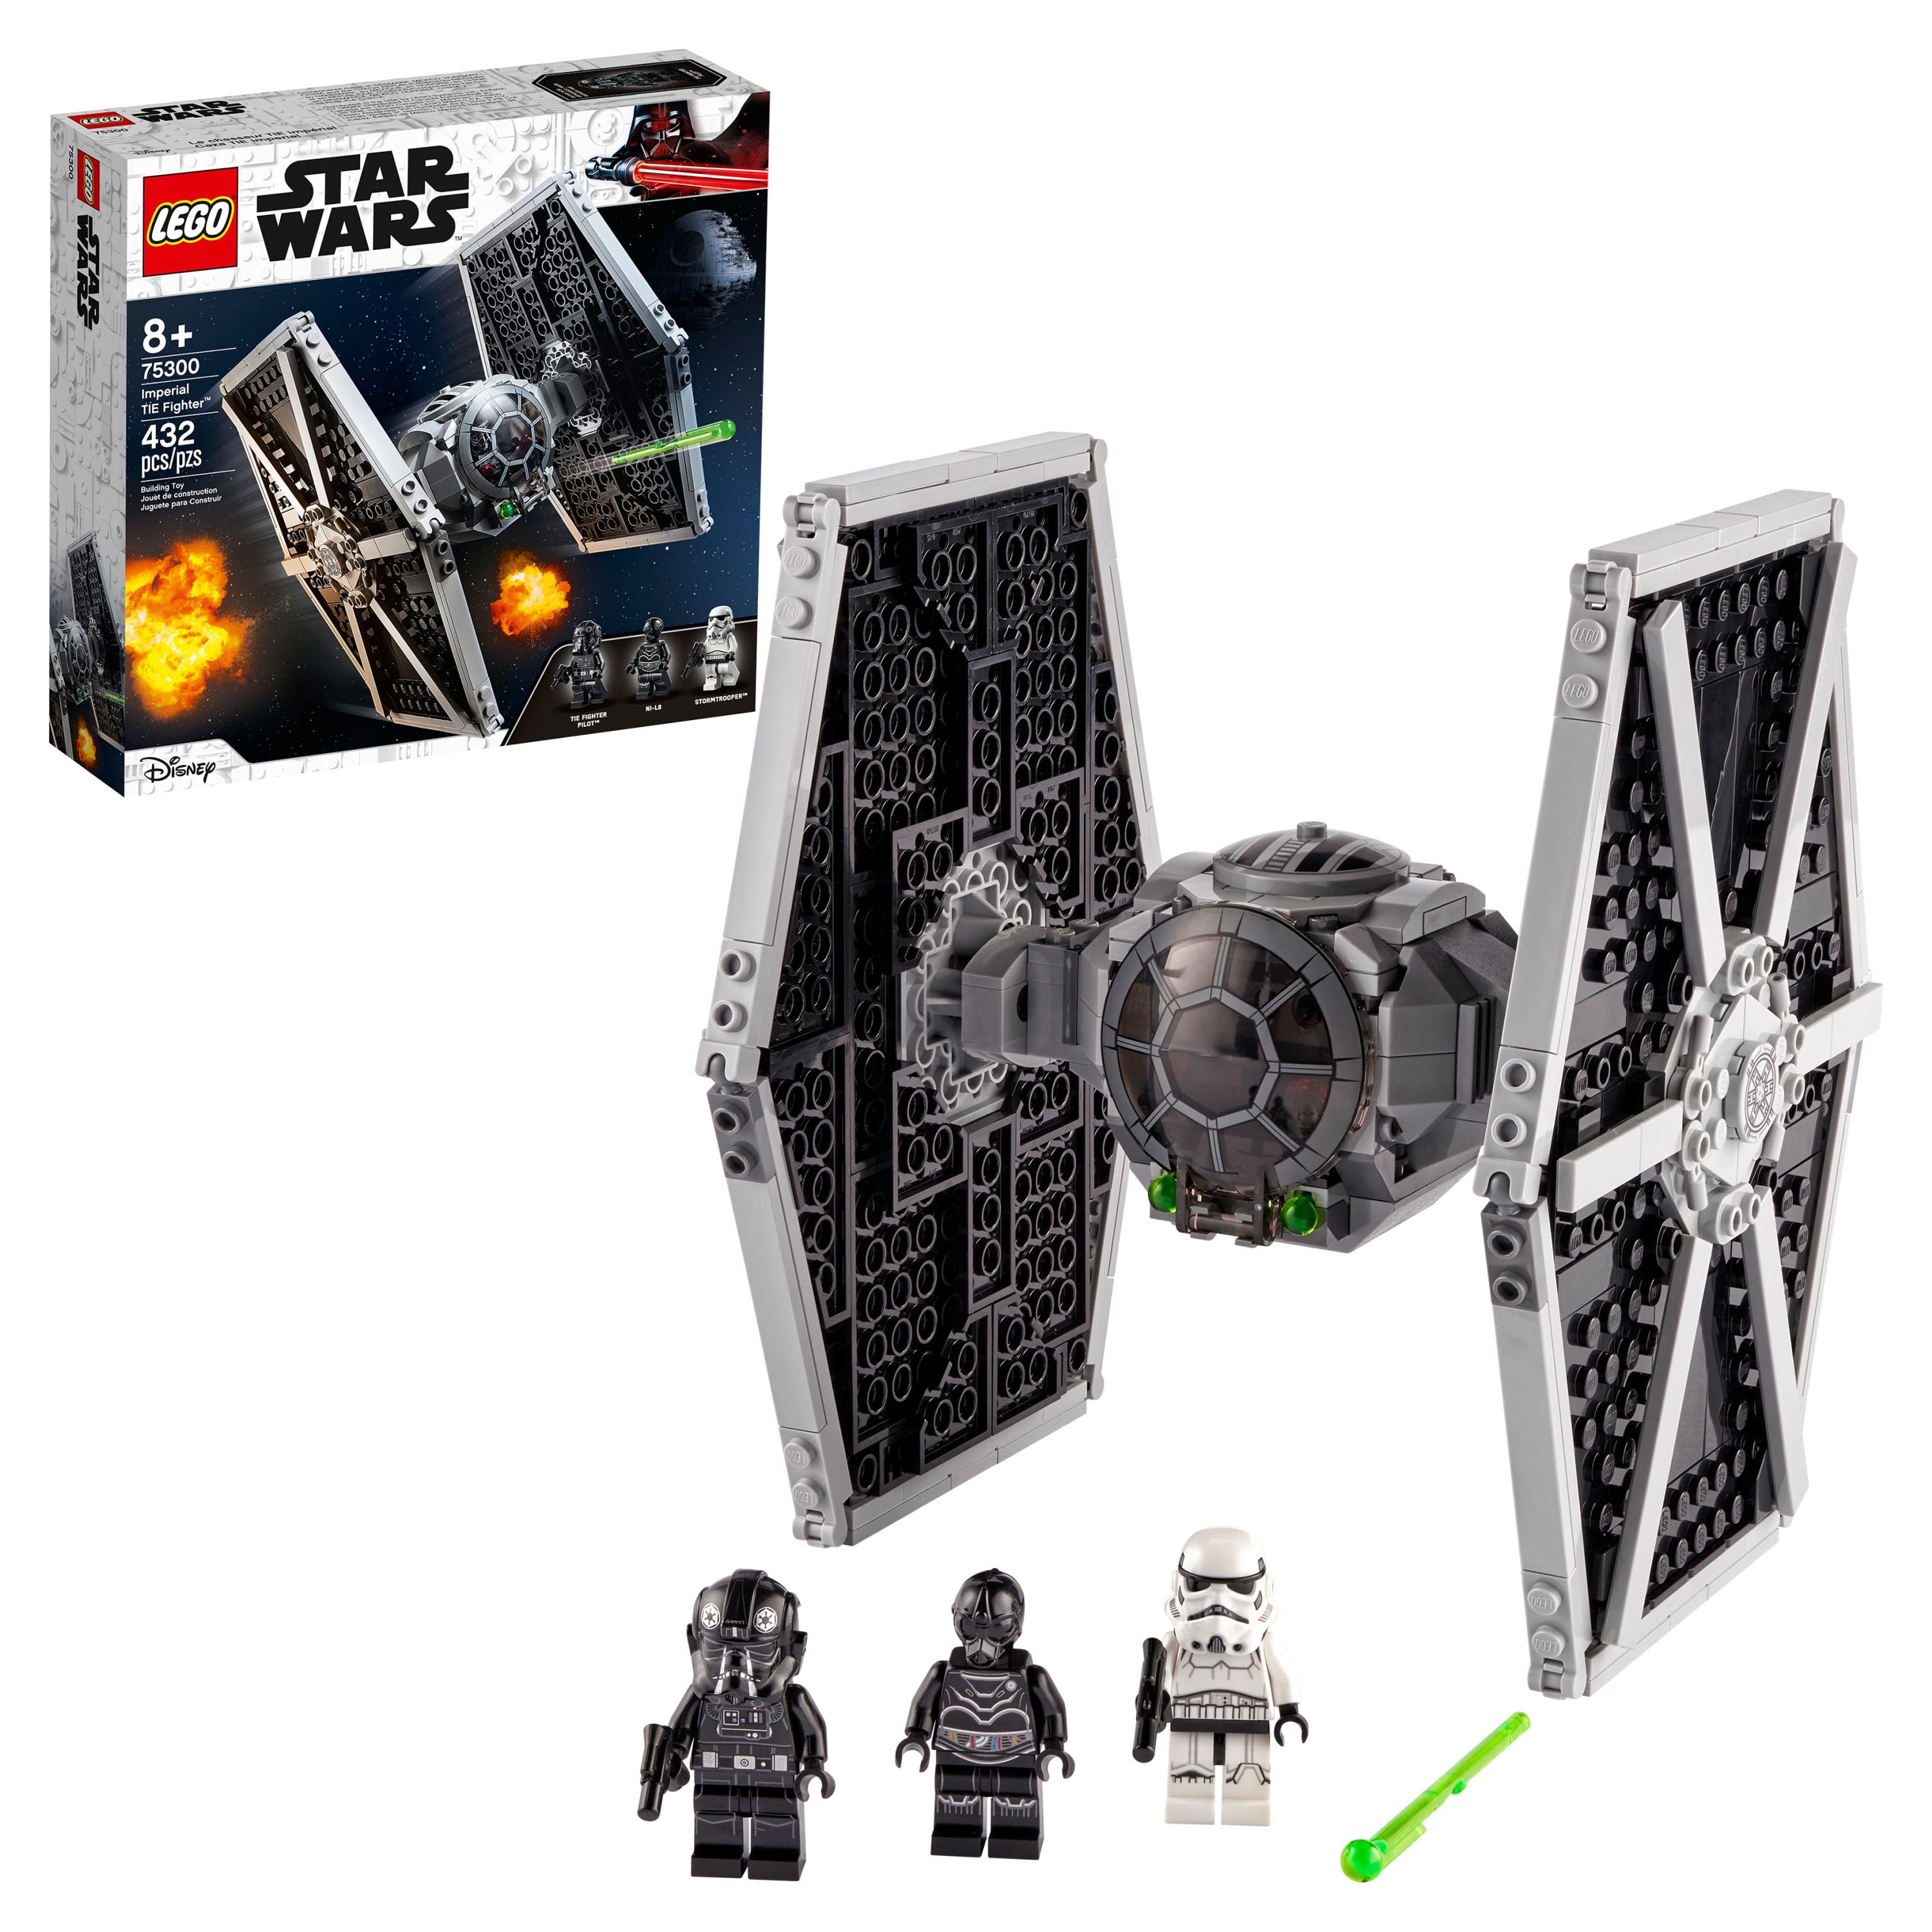 LEGO Star Wars Imperial TIE Fighter 75300, with Stormtrooper and TIE Fighter Pilot Minifigure - image 1 of 8